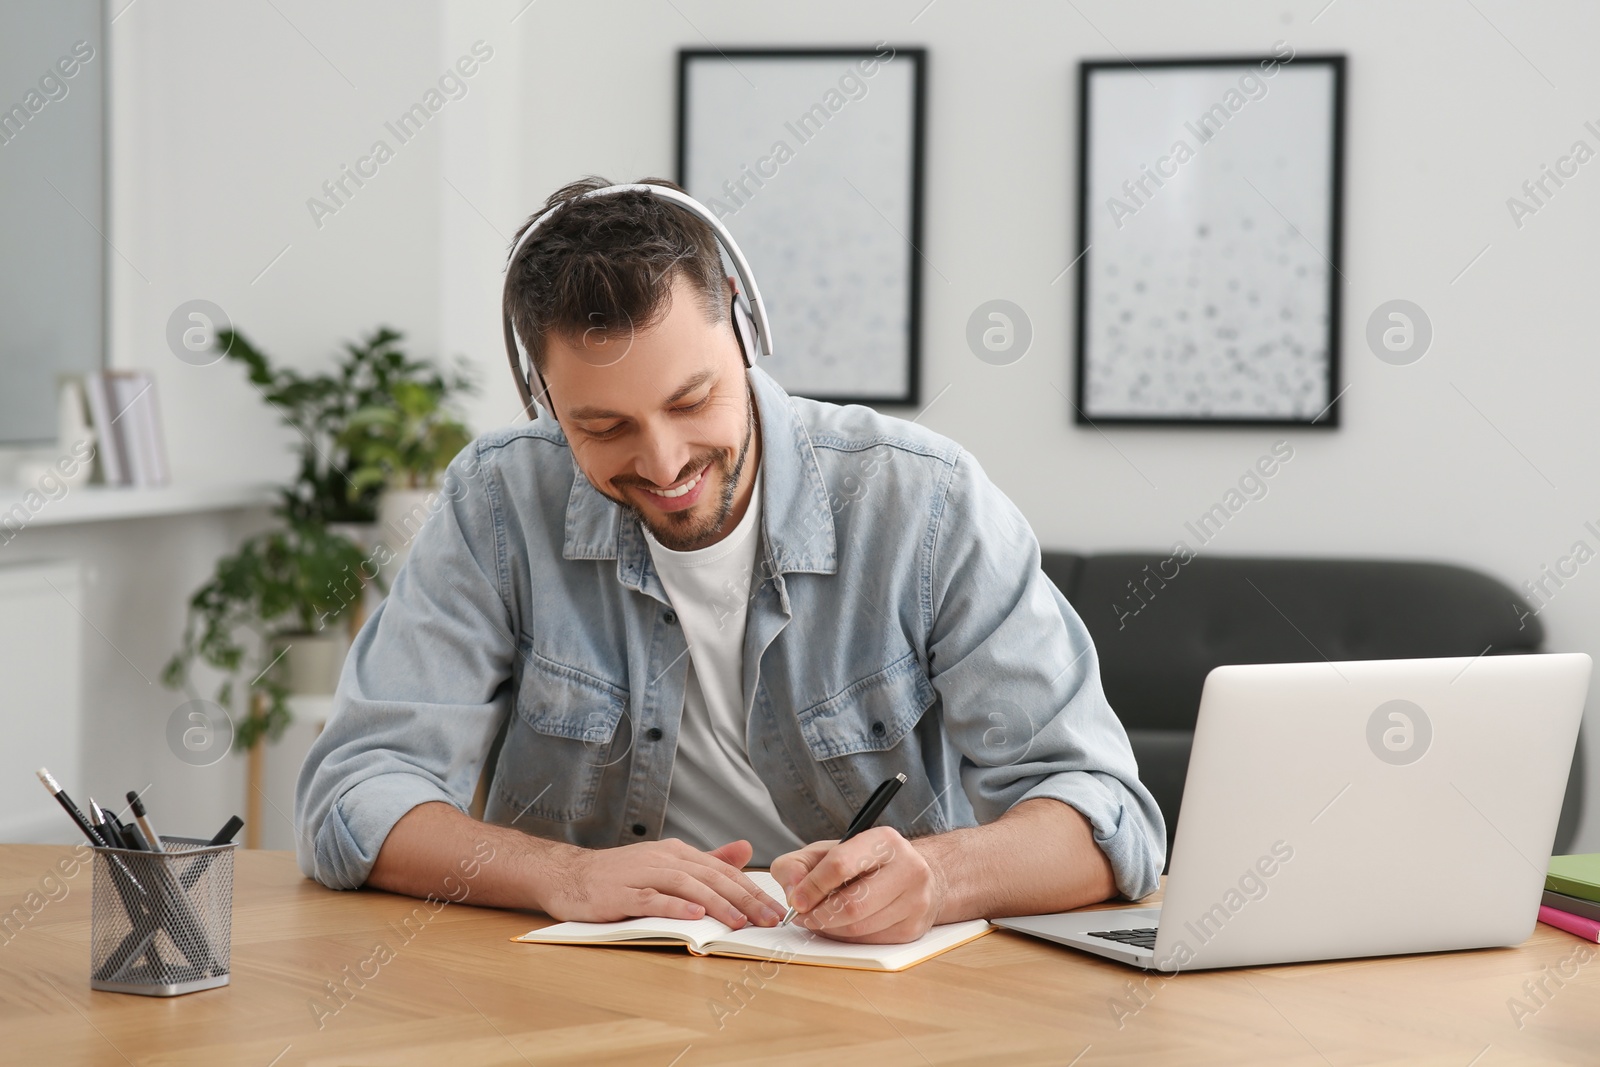 Photo of Online translation course. Man writing near laptop at home